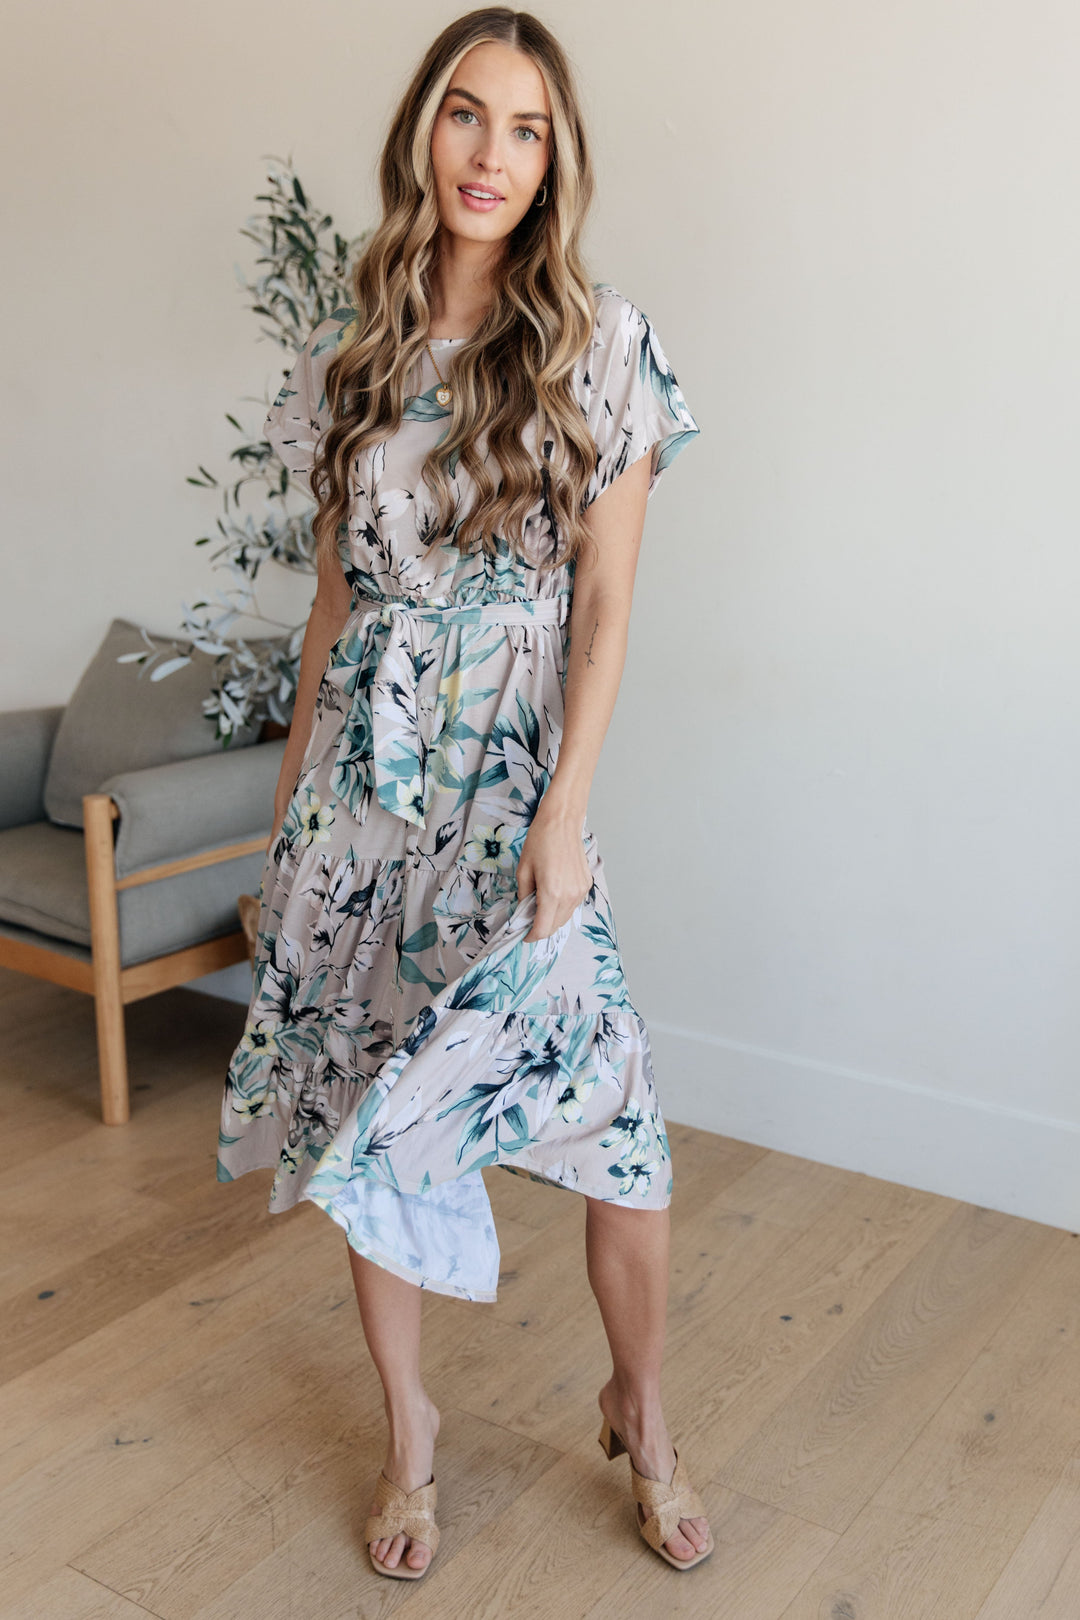 Into the Night Dolman Sleeve Floral Dress-Dresses-Inspired by Justeen-Women's Clothing Boutique in Chicago, Illinois